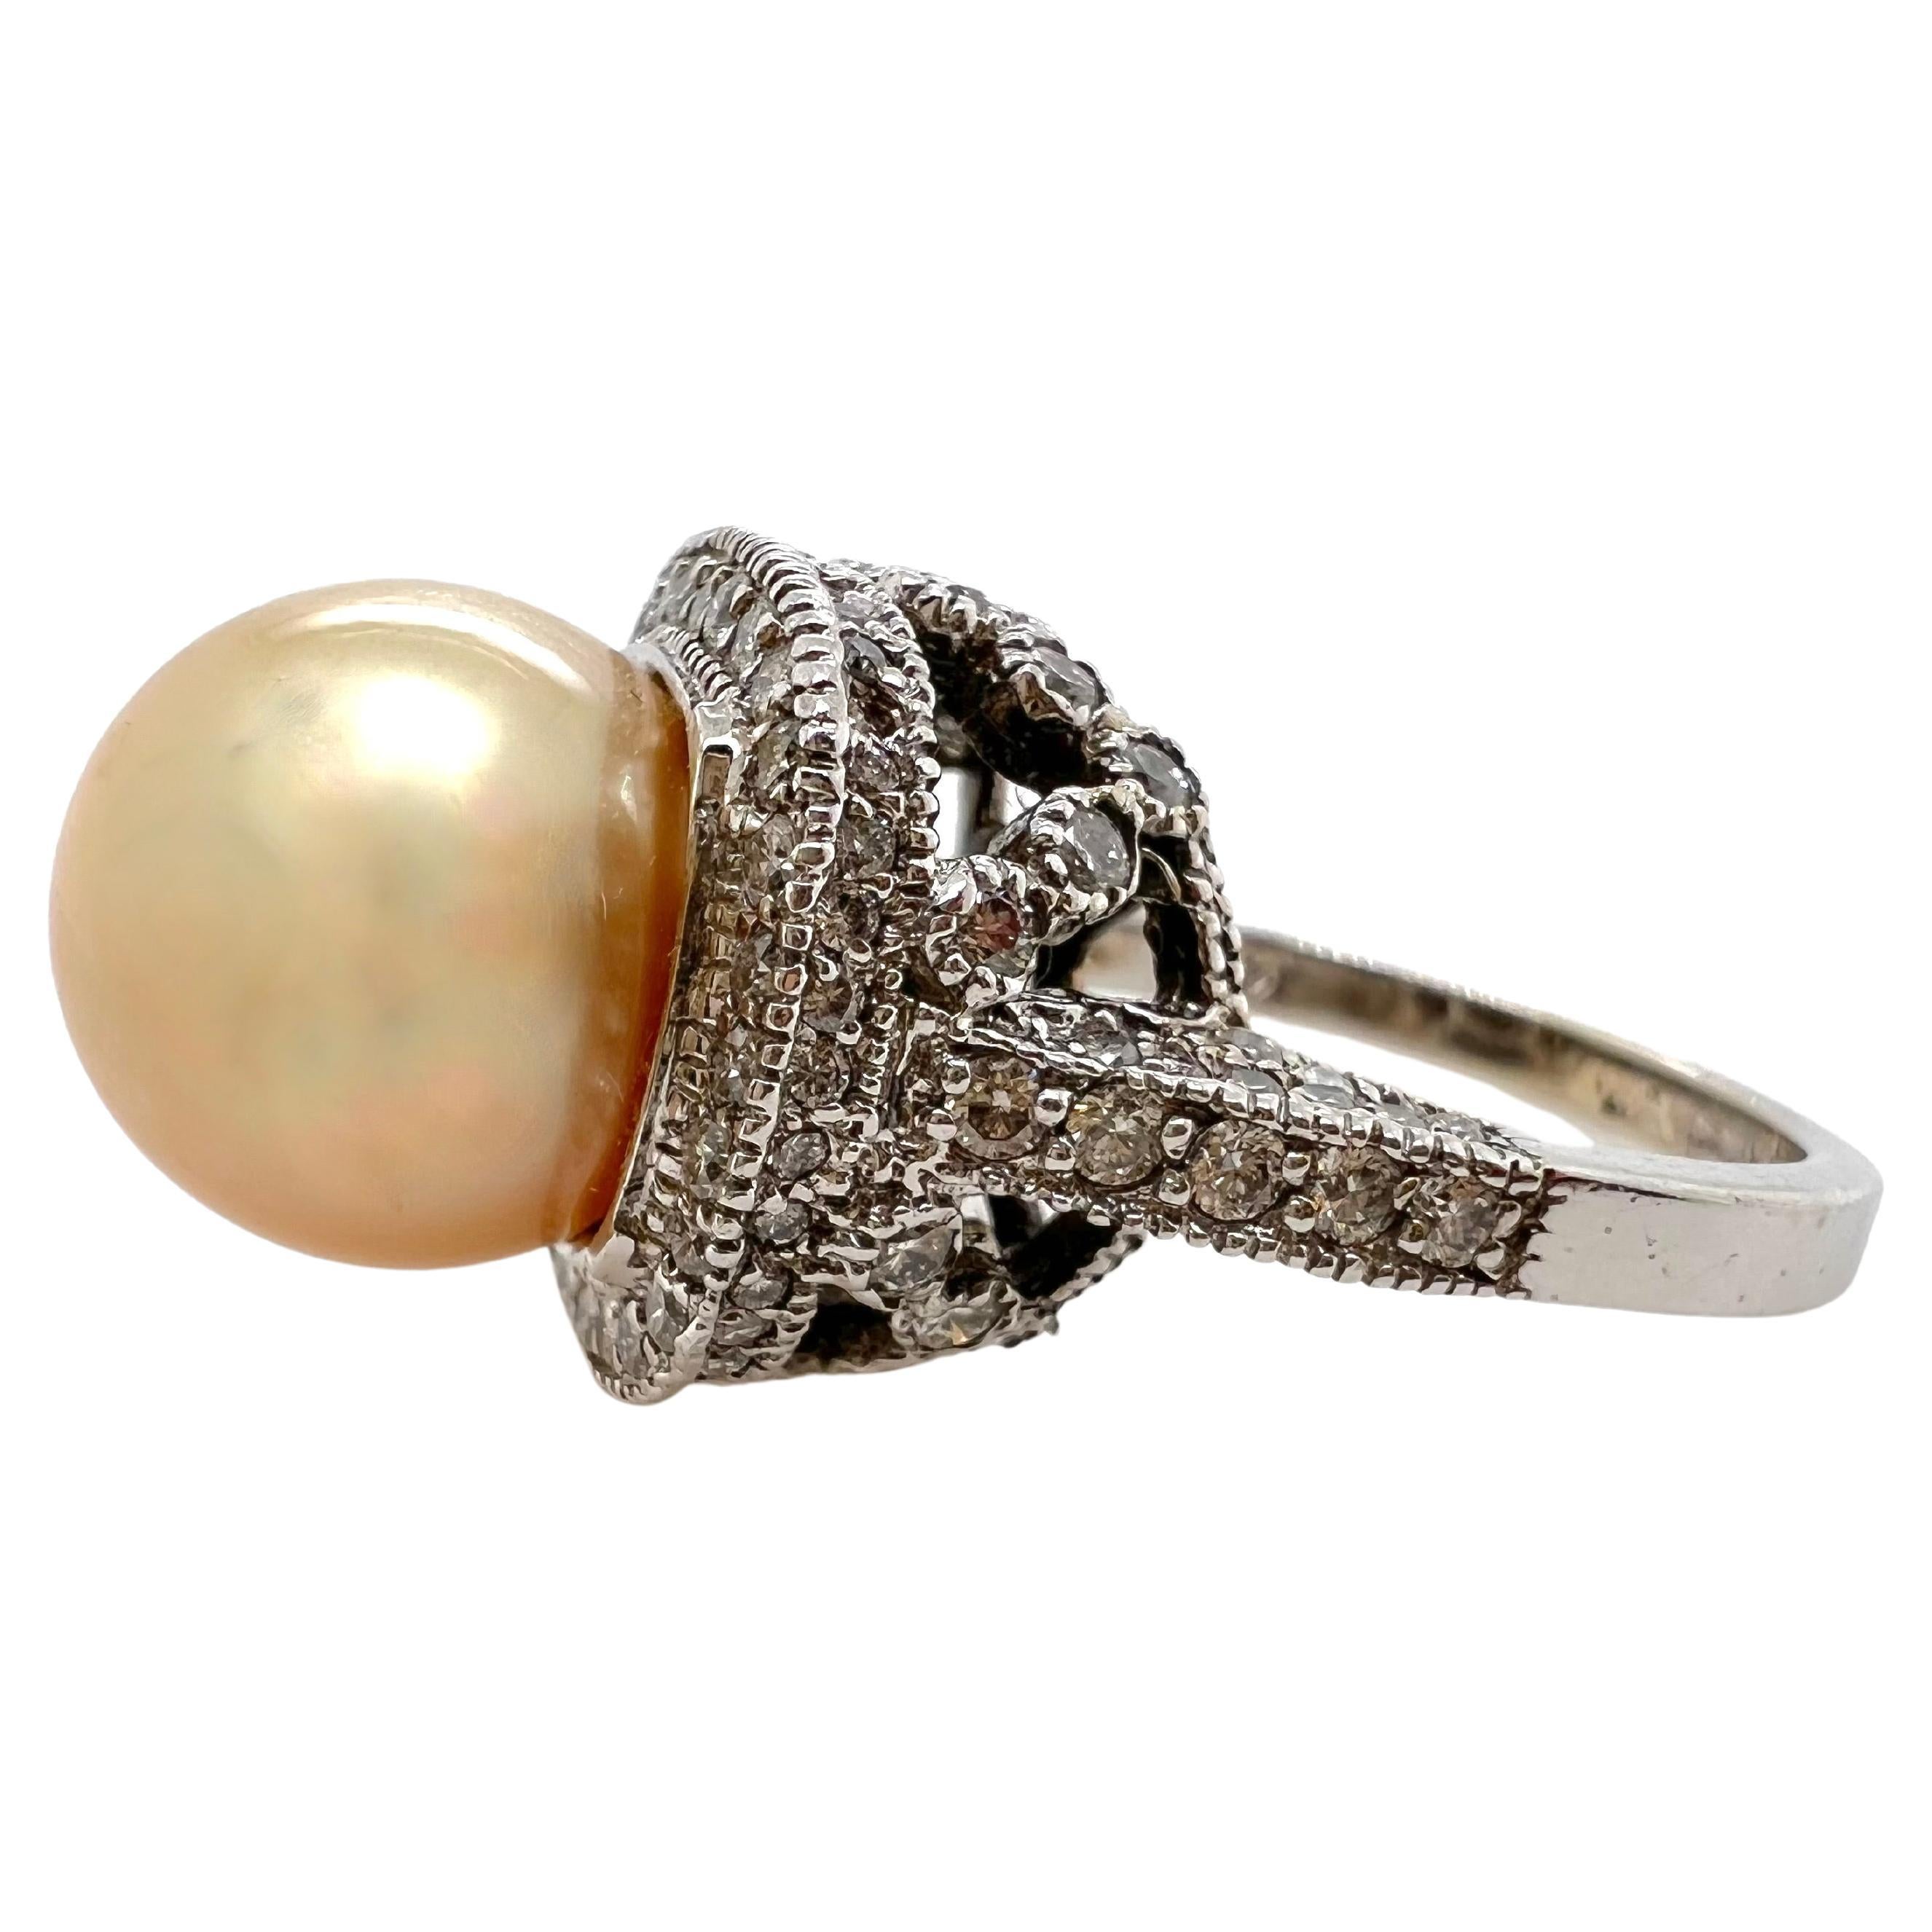 This gorgeous, golden south sea pearl is set on a bed of diamonds in this artistic setting that accentuates the luster and color of the pearl.  The pearl is 11.50 mm and sits on a beautiful mounting with diamonds on the profile and band.


Size: 6.5